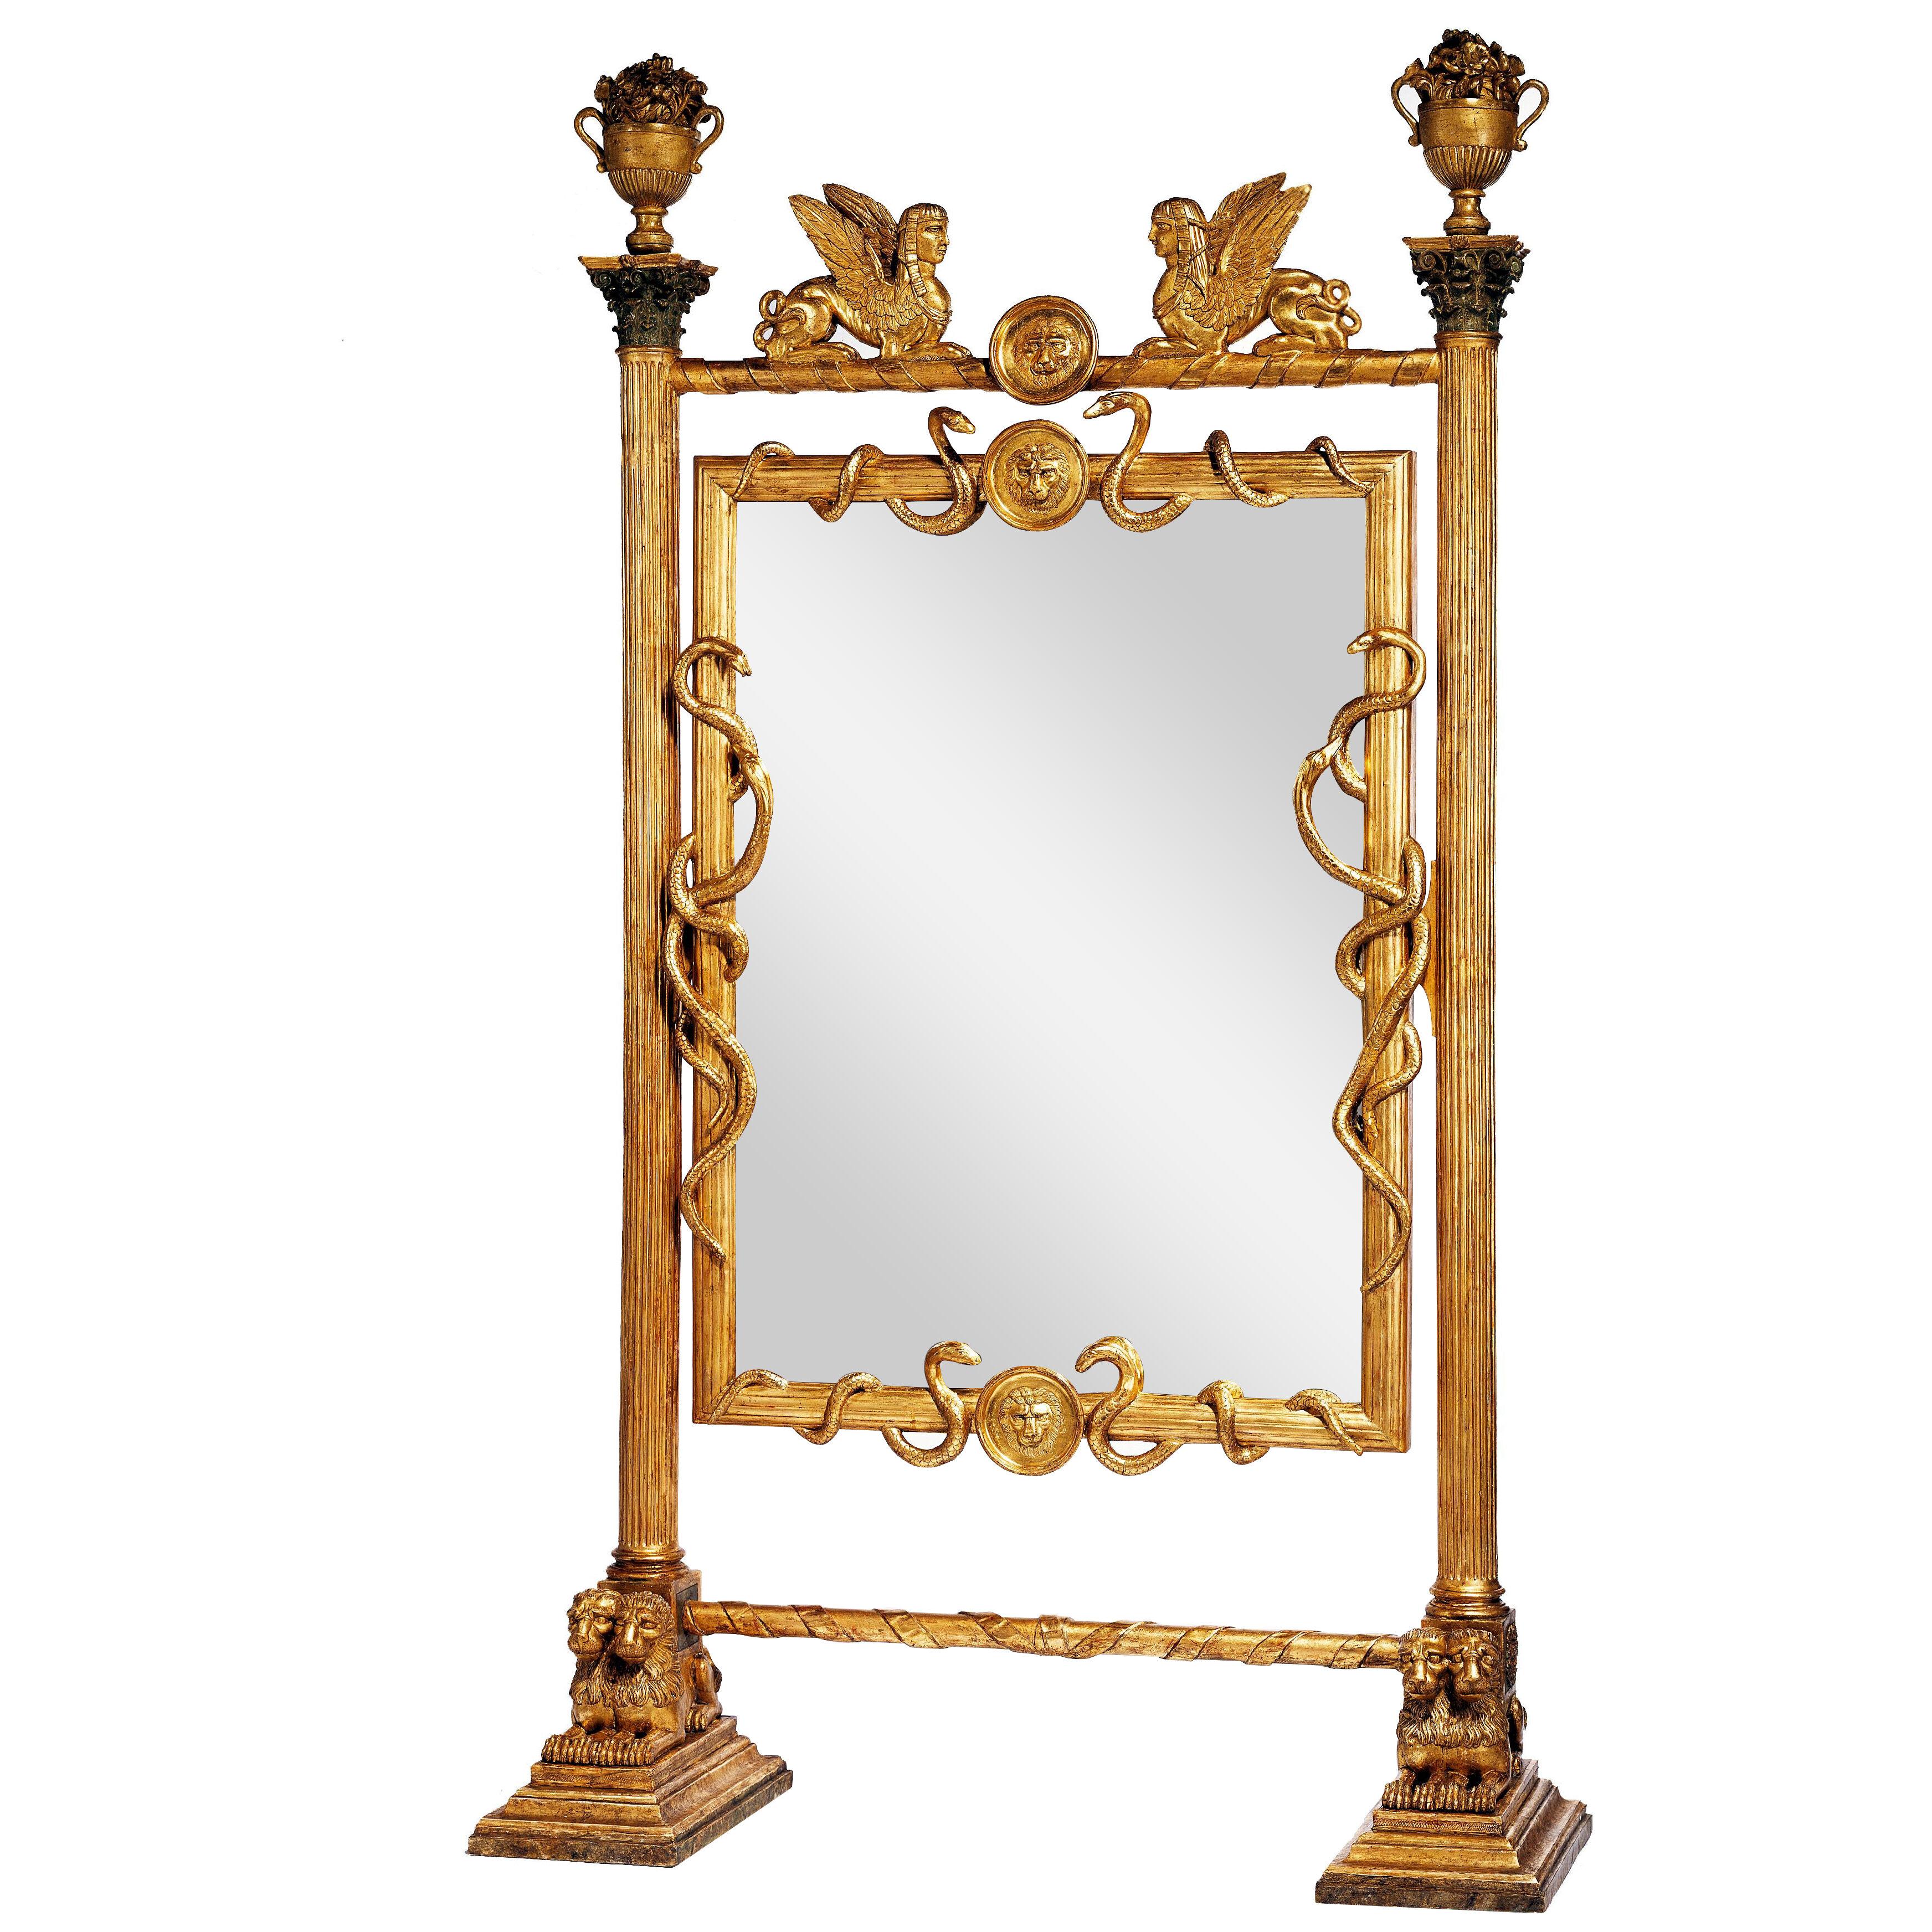 Exceptional Early 19th Century Empire Cheval Mirror, Russia or Sweden